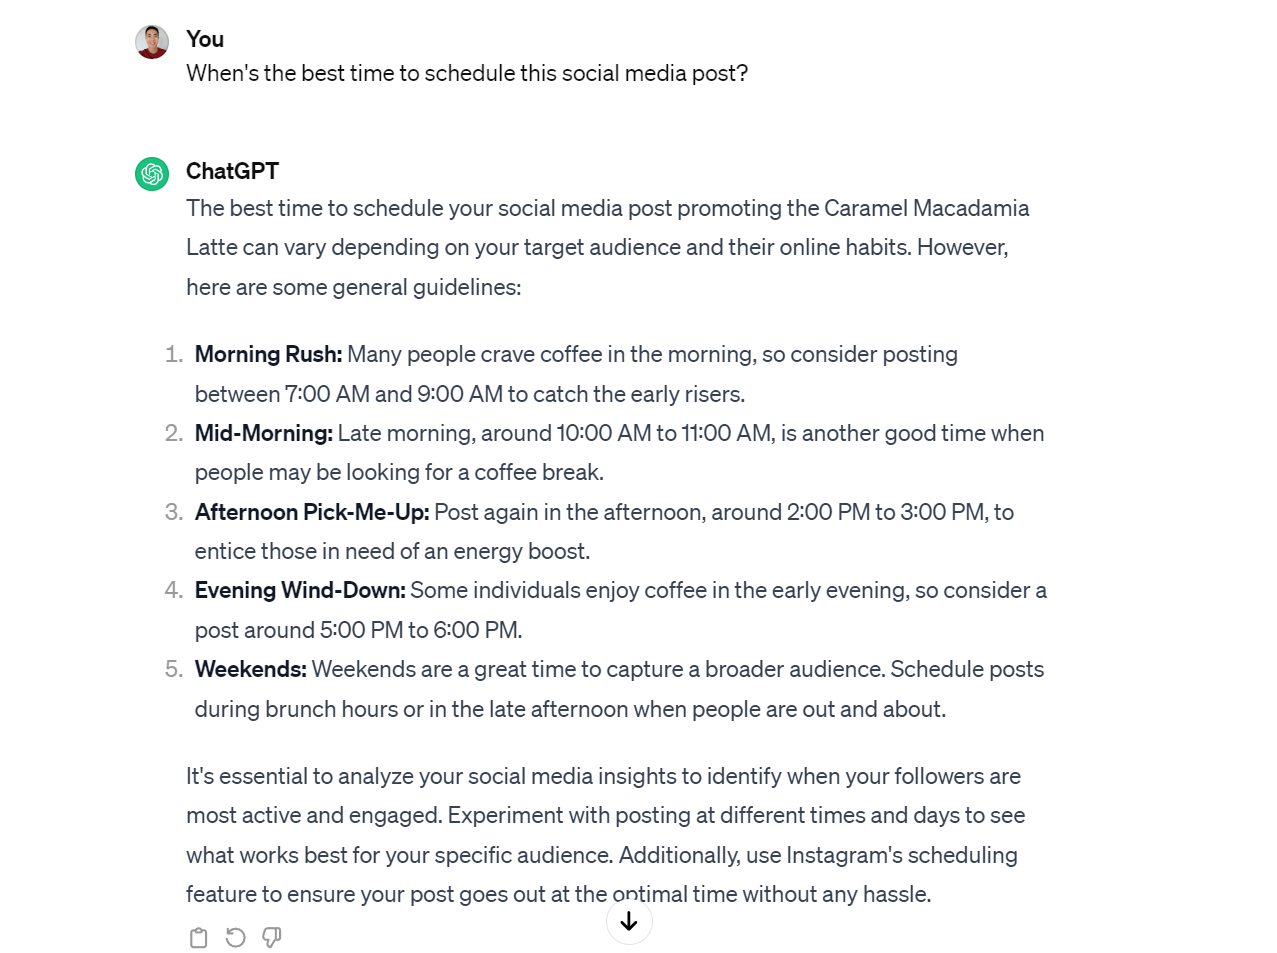 suggestion by chatgpt on best times to schedule social media posts